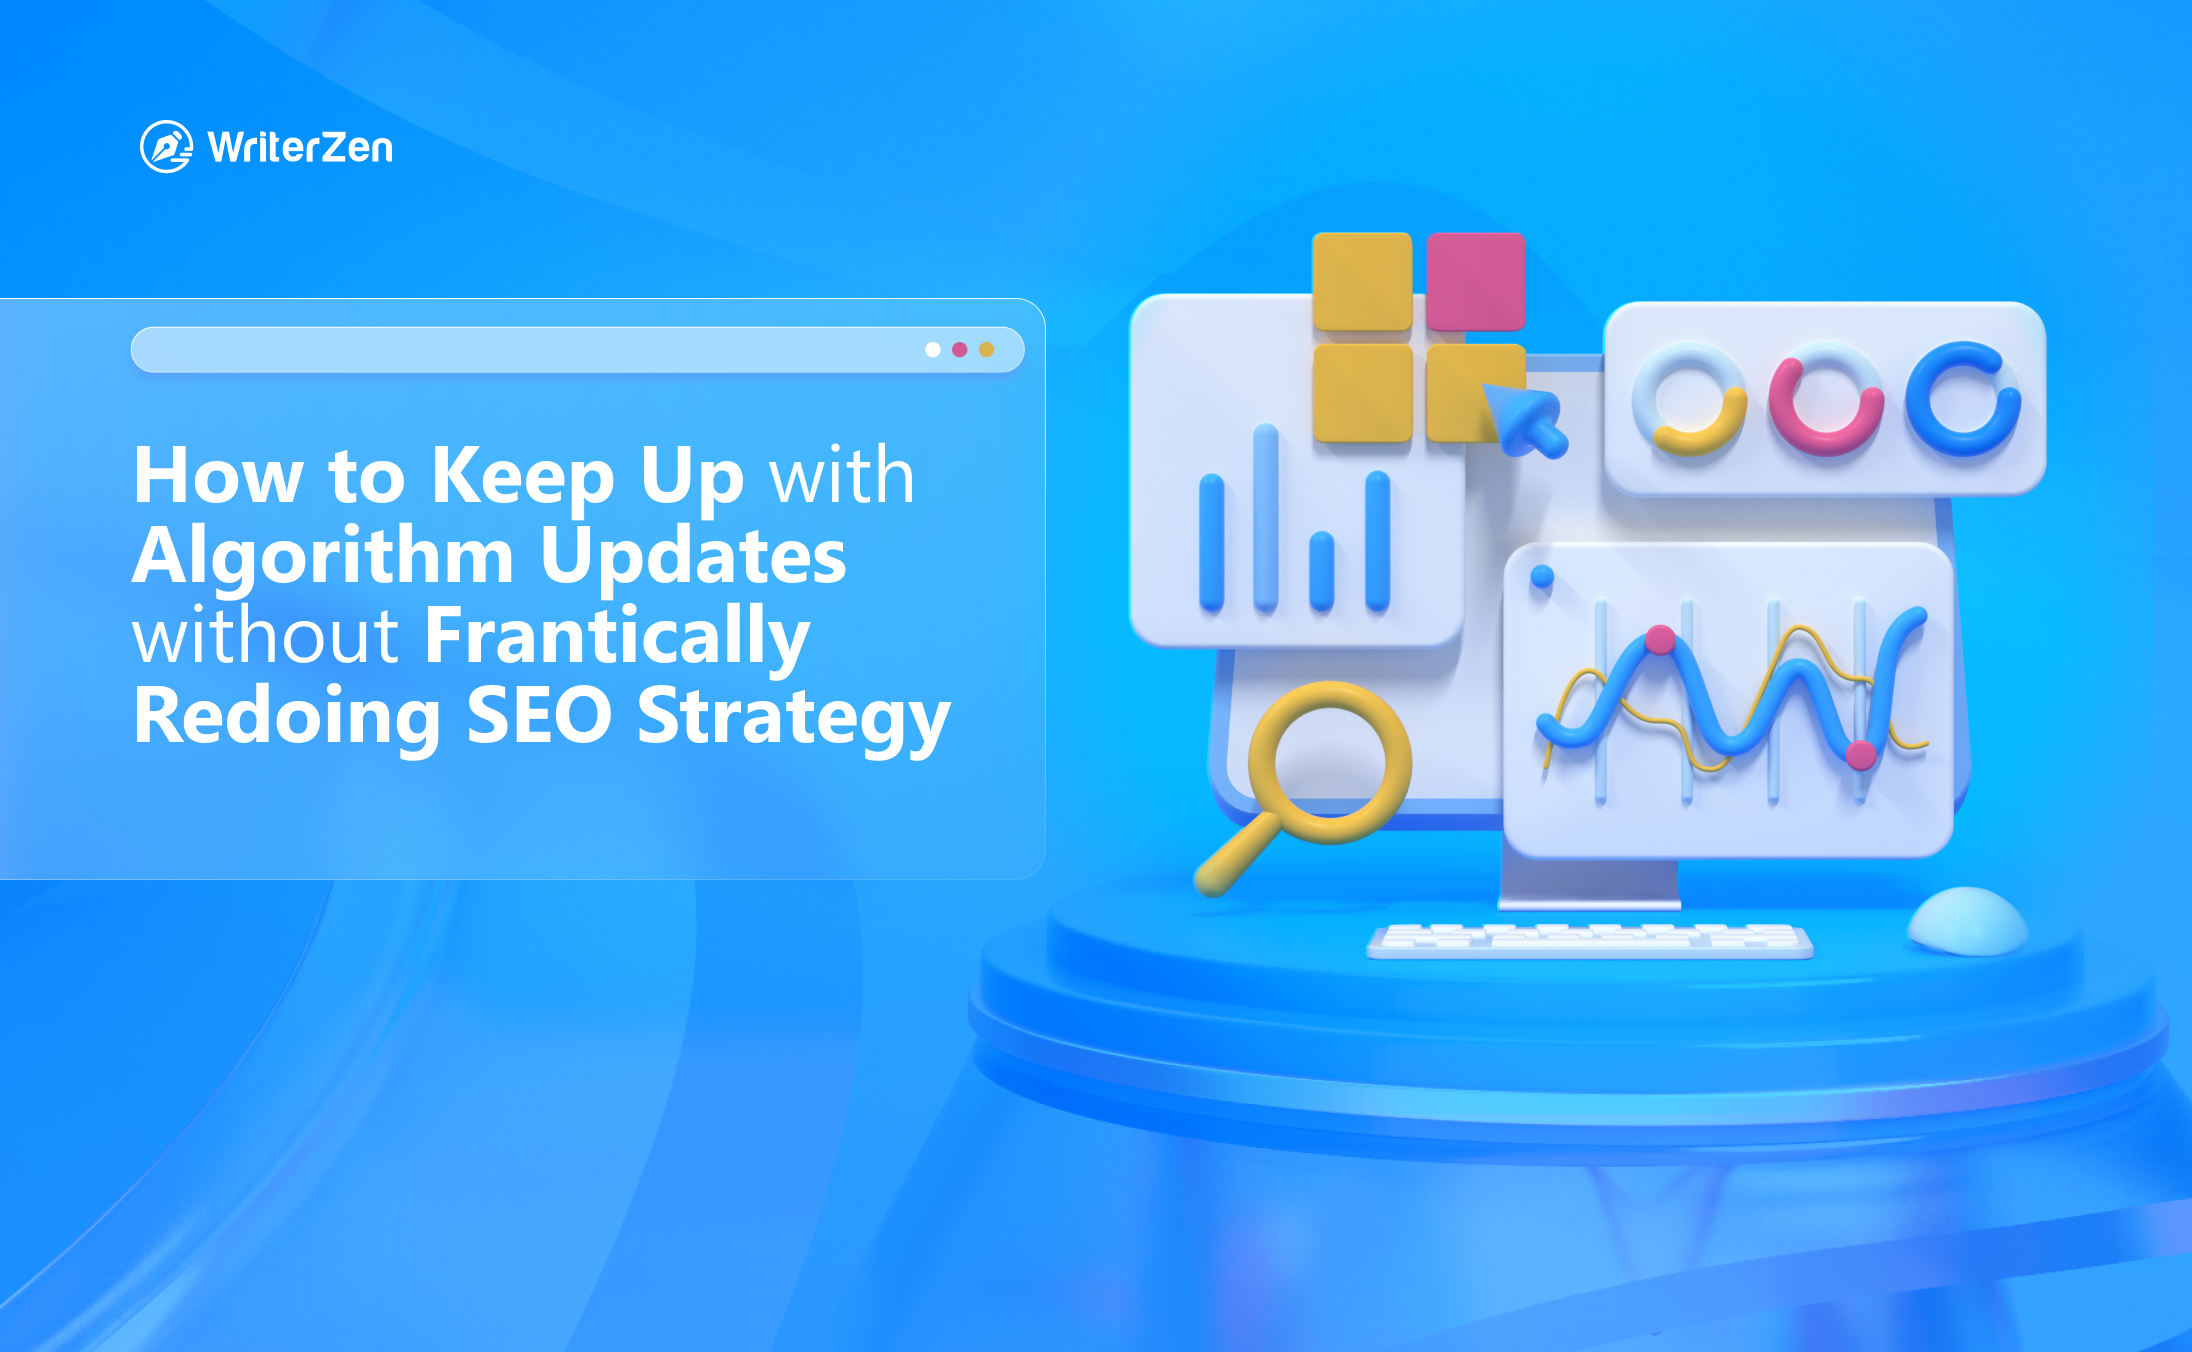 How to Keep Up with Algorithm Updates without Frantically Redoing SEO Strategy